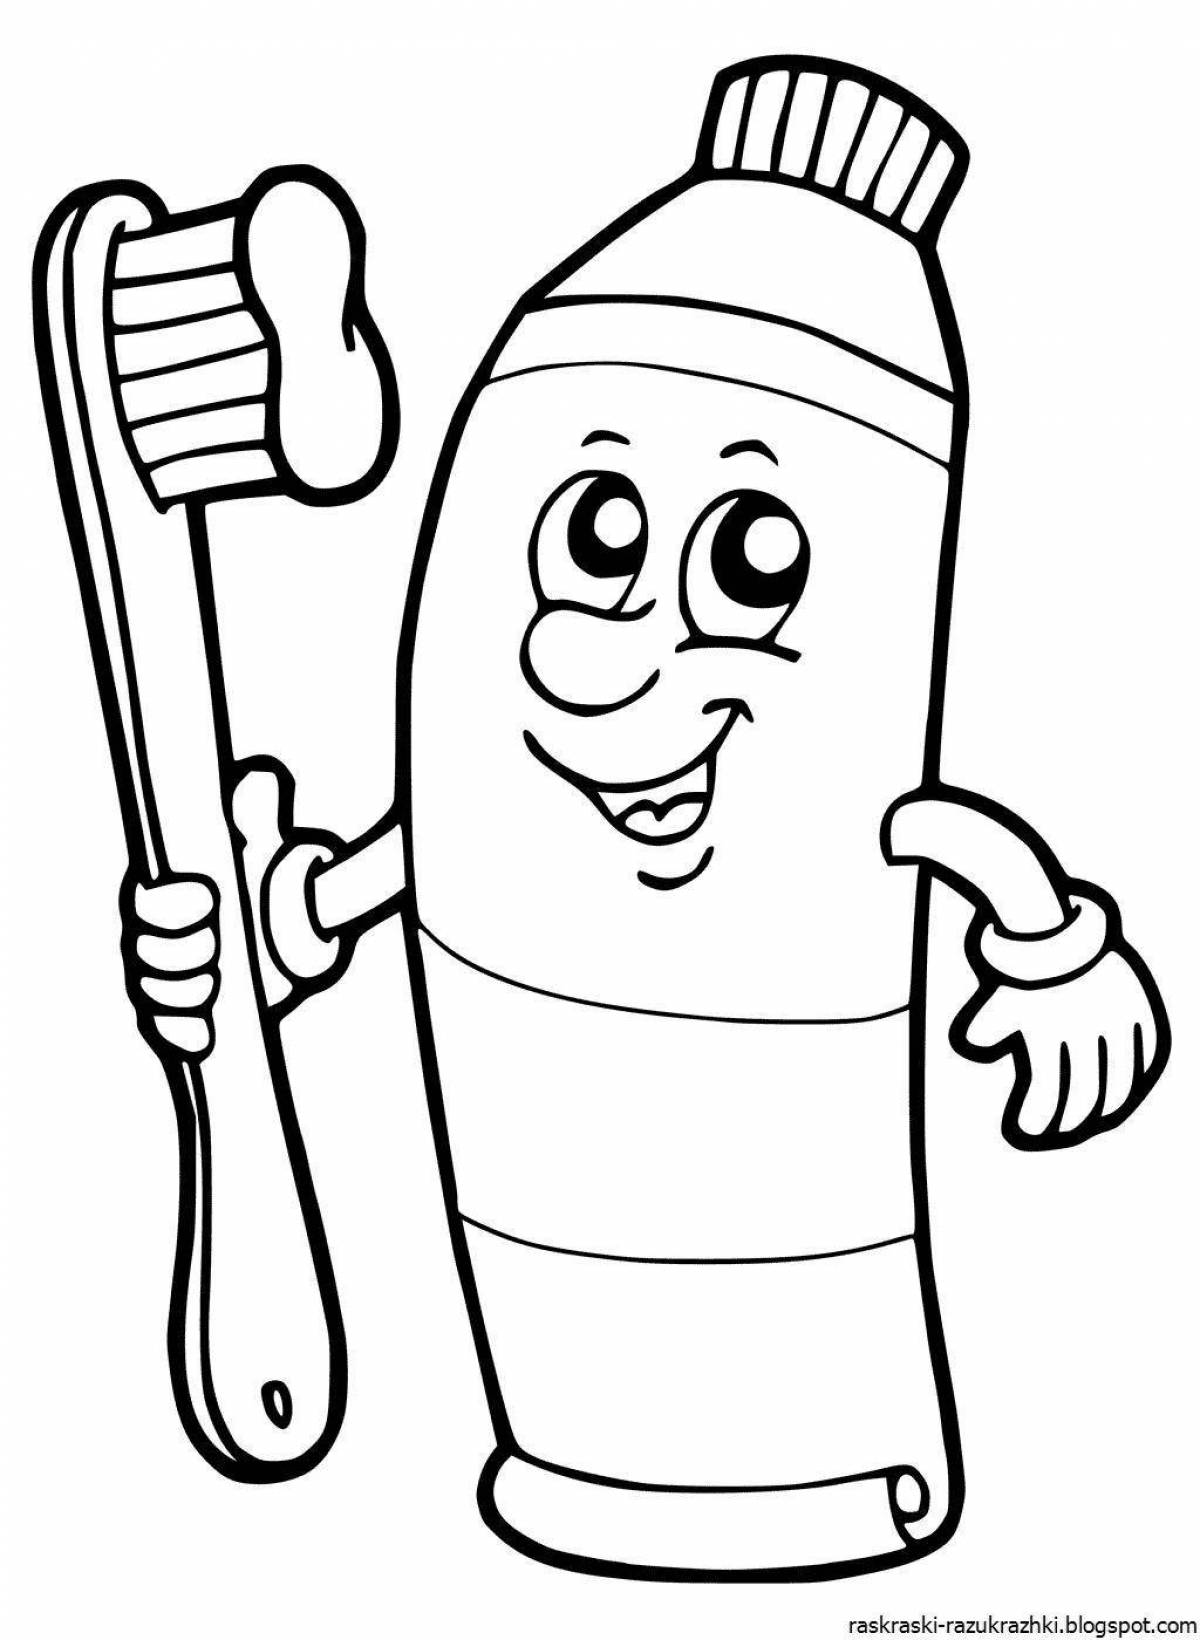 Playful hygiene coloring page